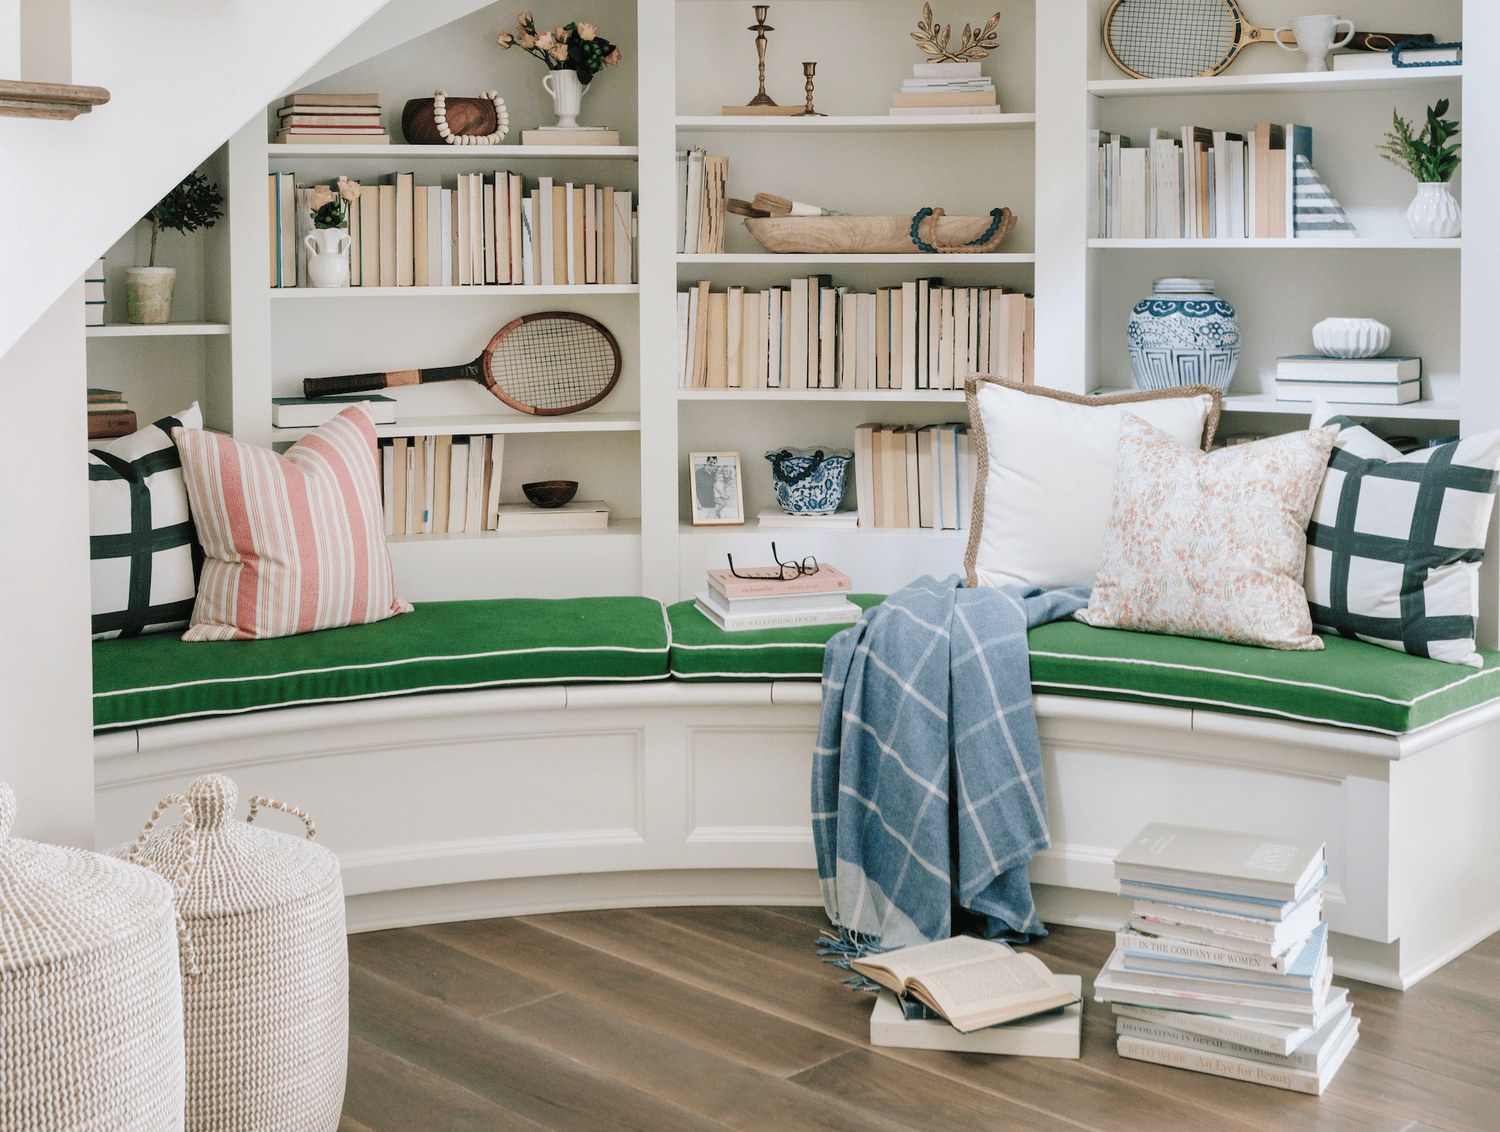 Reading nook under stairs with green cushion and pink pillows and bookcases